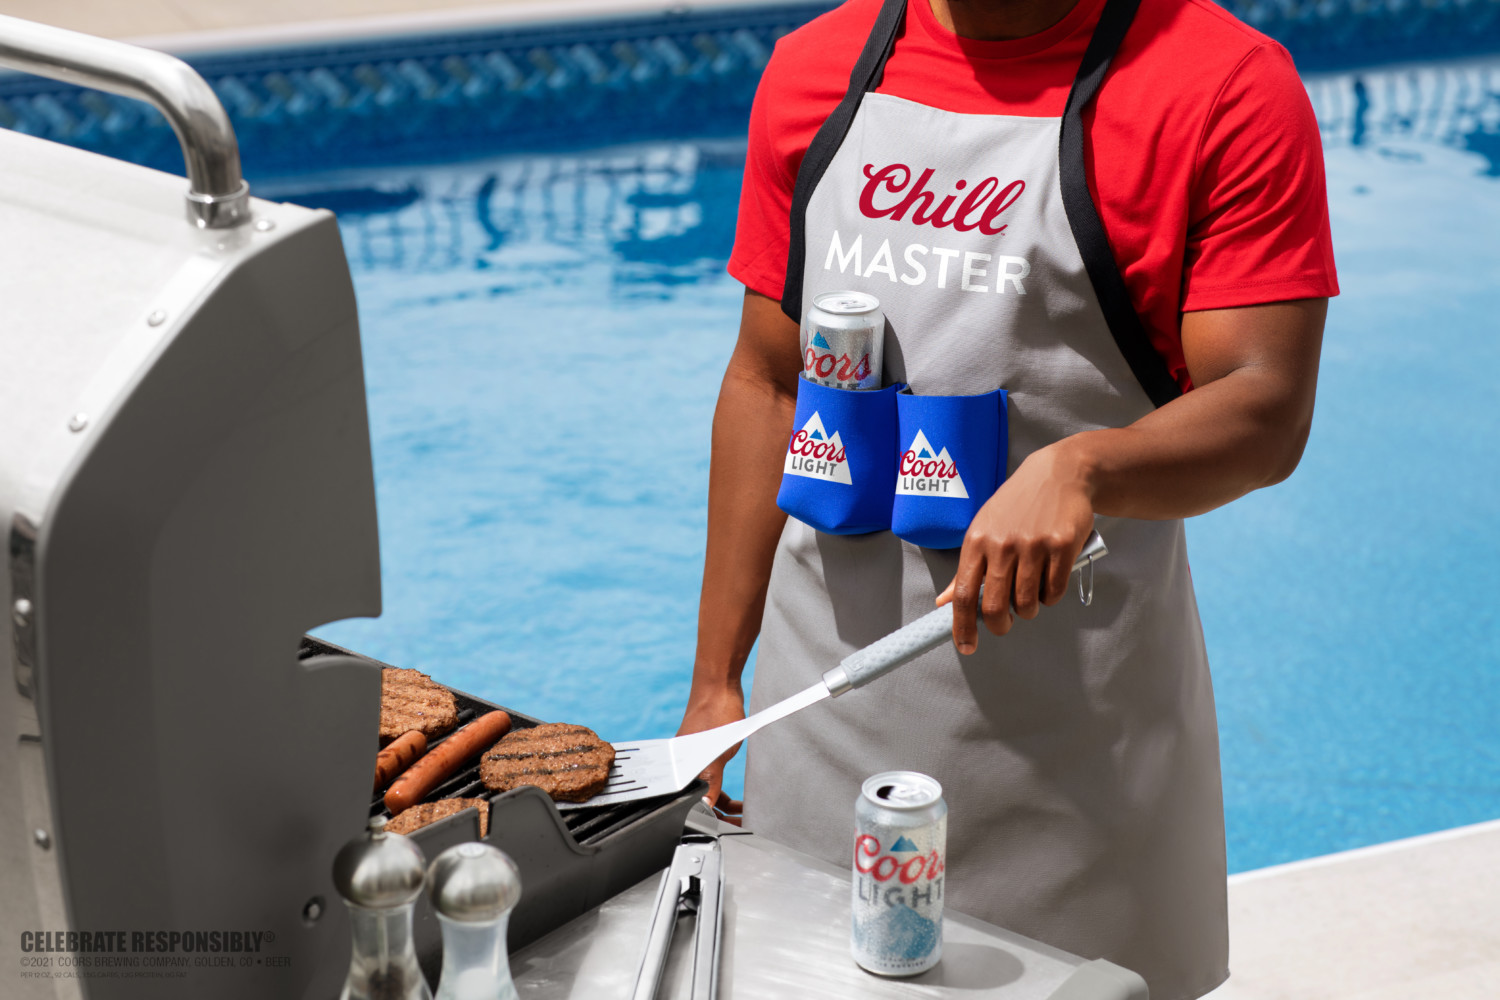 Coors Just Launched A Fun And Campy Line Of Merchandise